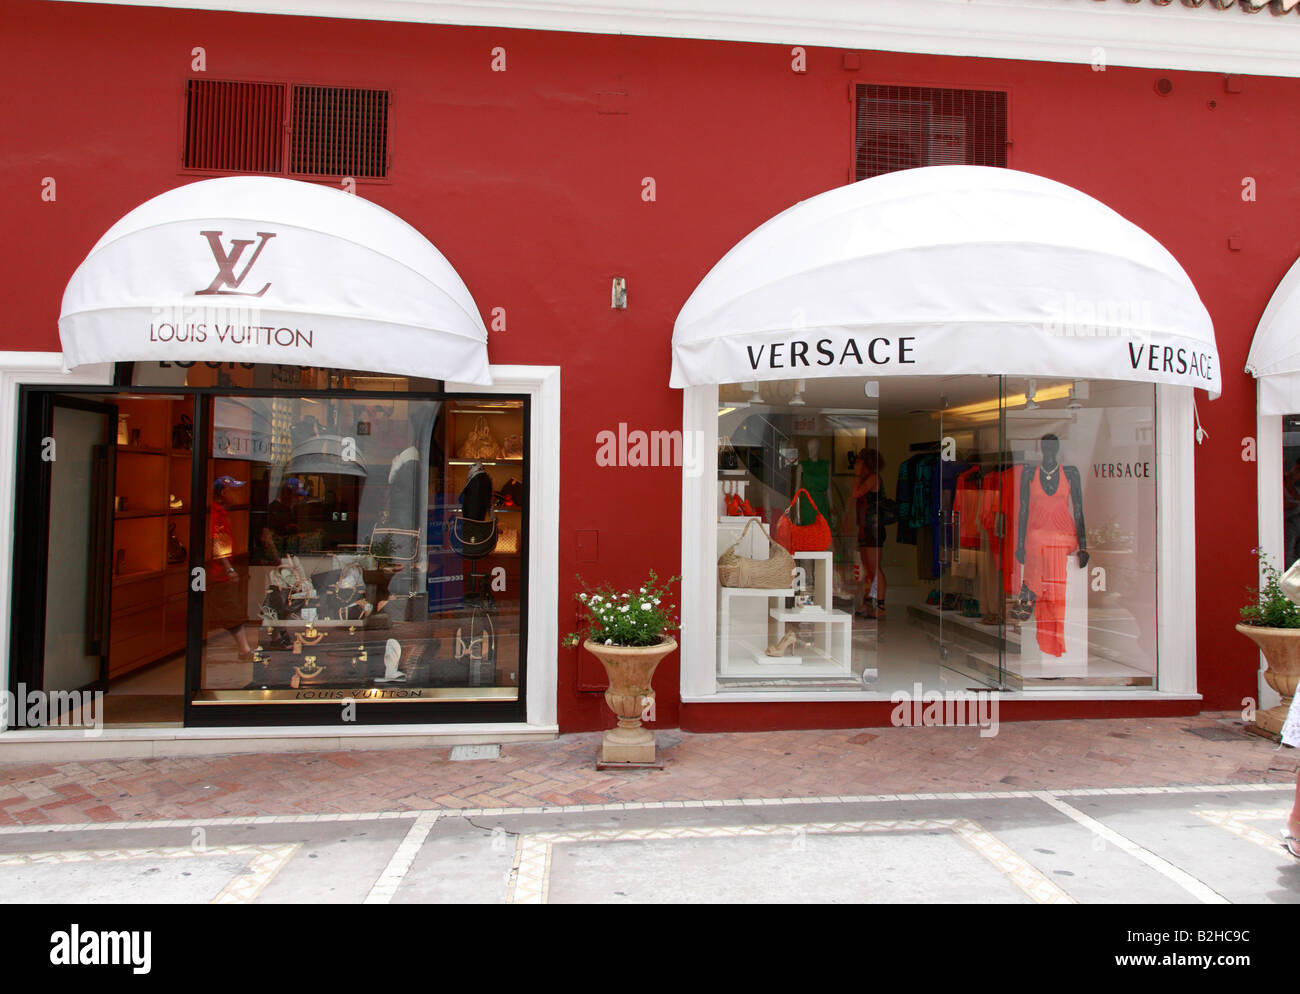 Louis Vuitton and Versace boutiques in Via Camerelle on Capri